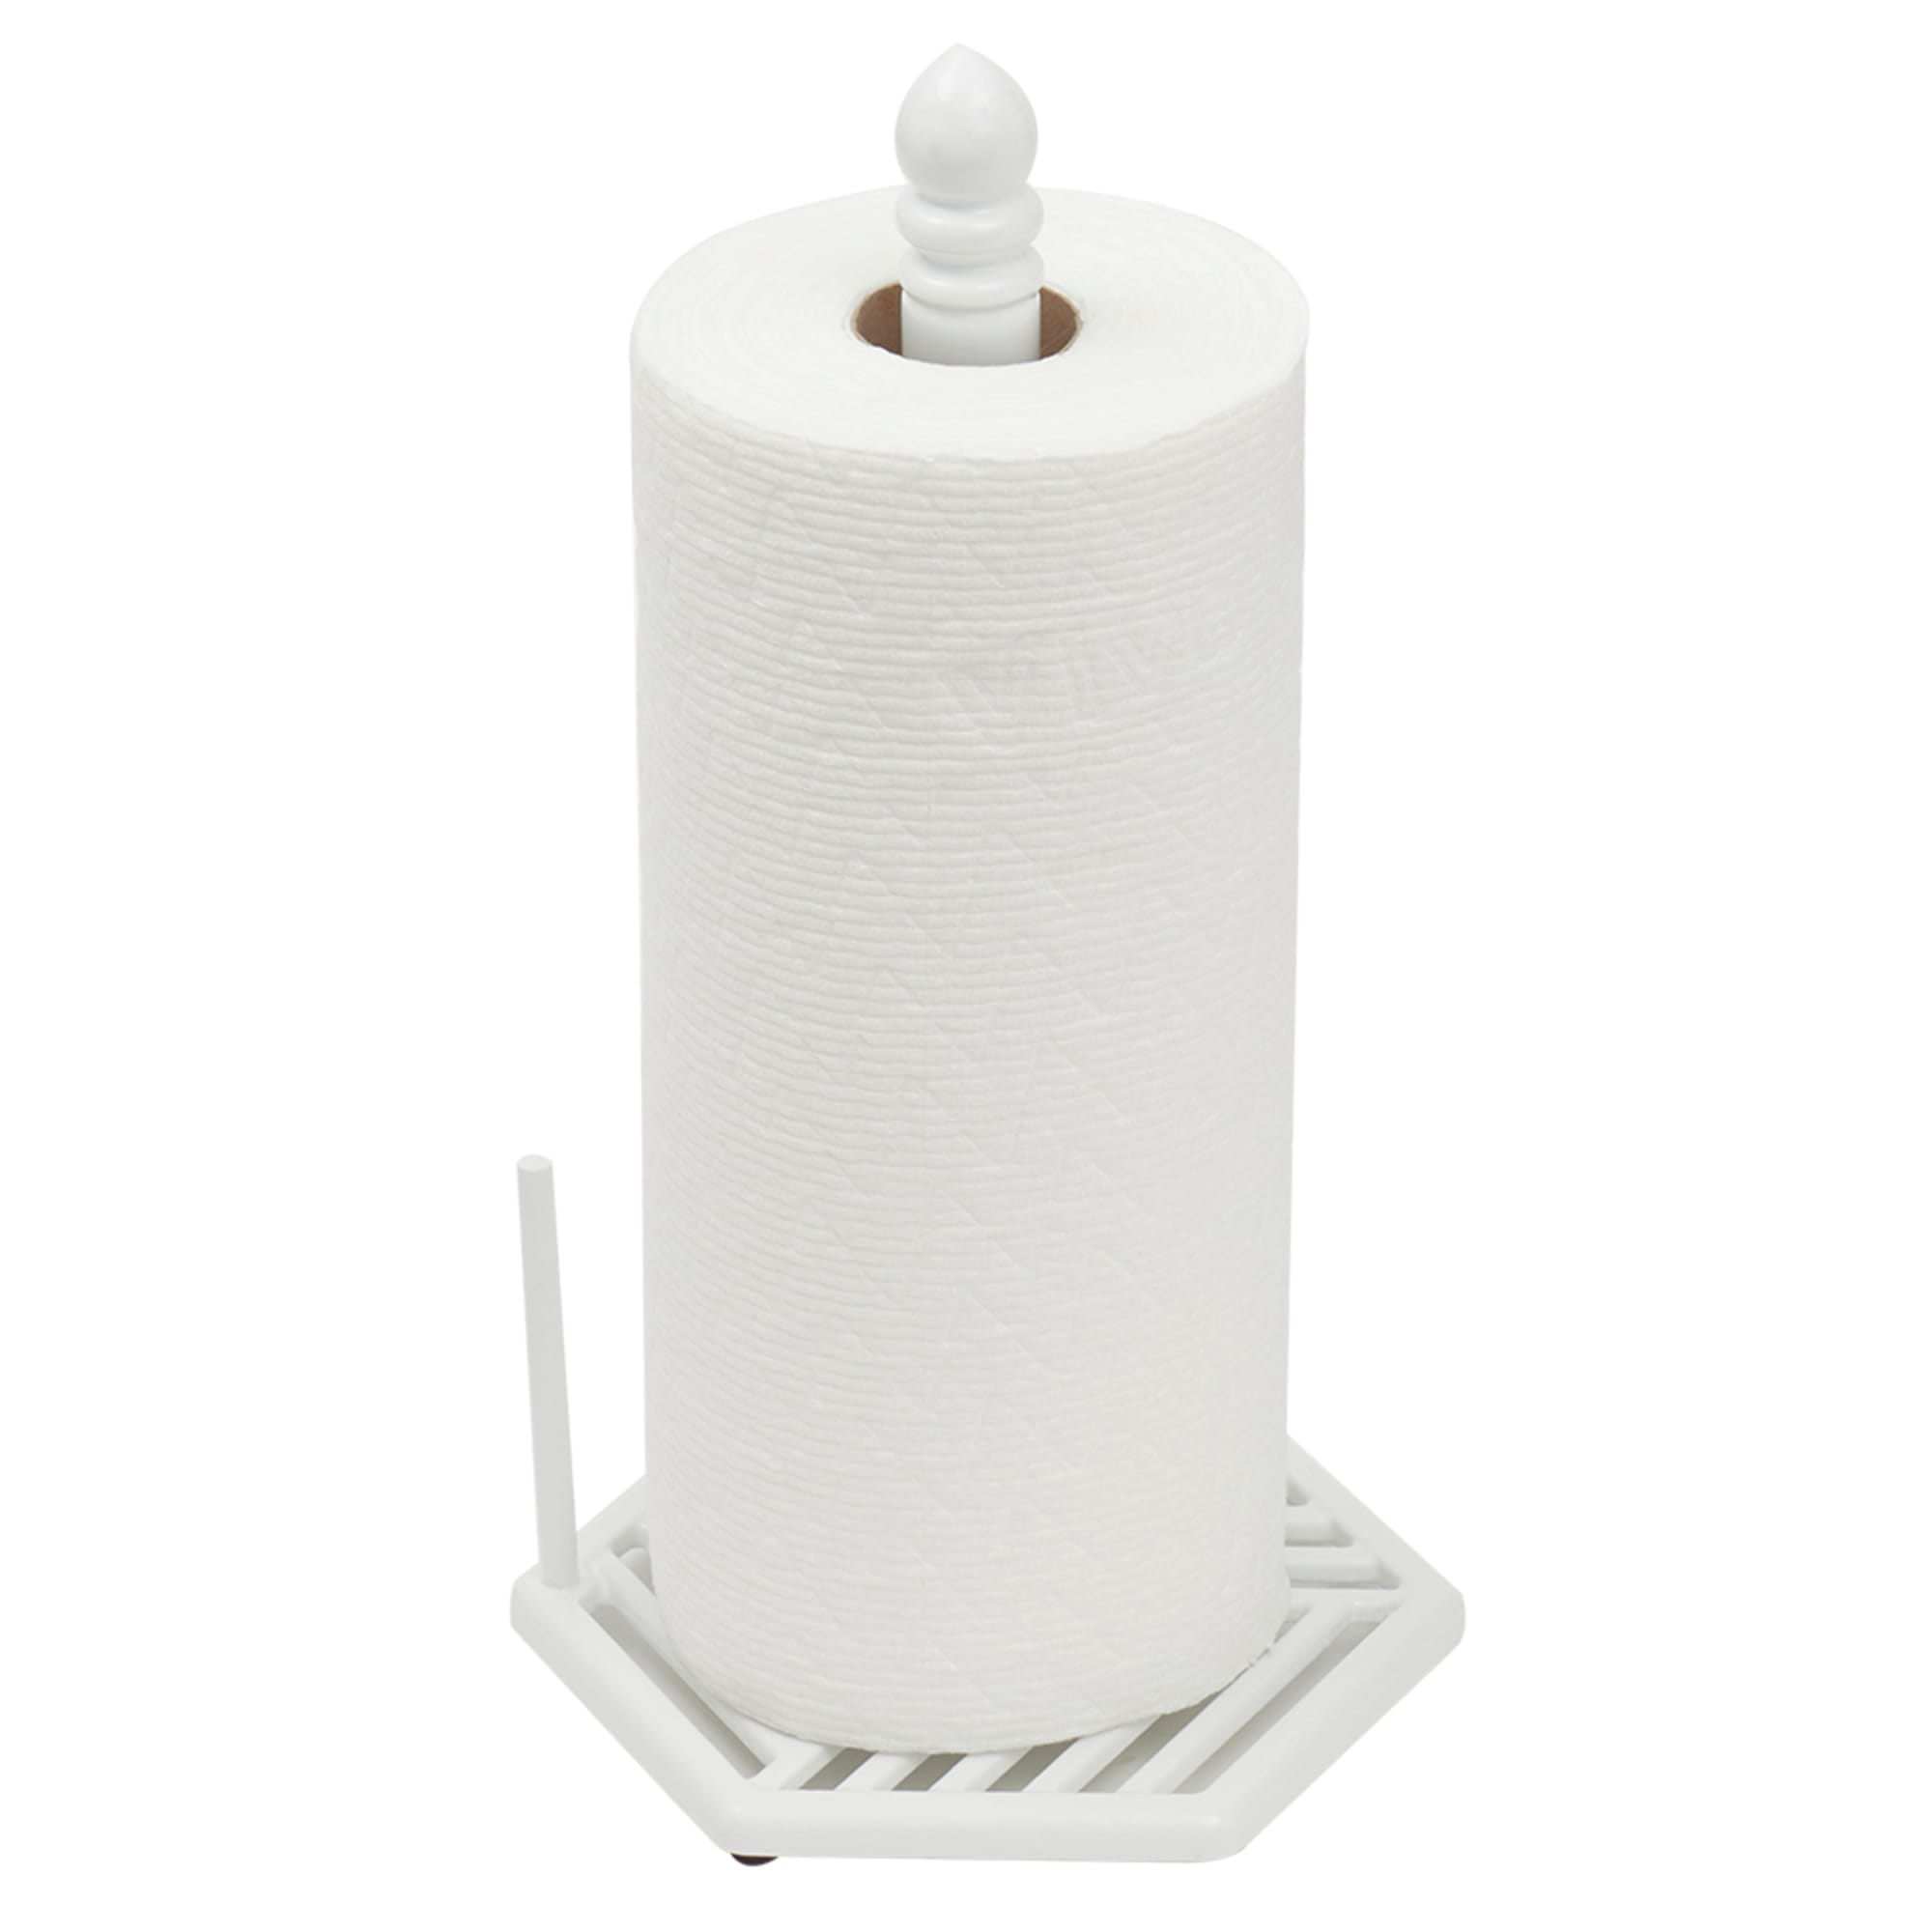 Home Basics Lines Freestanding Cast Iron Paper Towel Holder with Dispensing Side Bar, White $8.00 EACH, CASE PACK OF 3